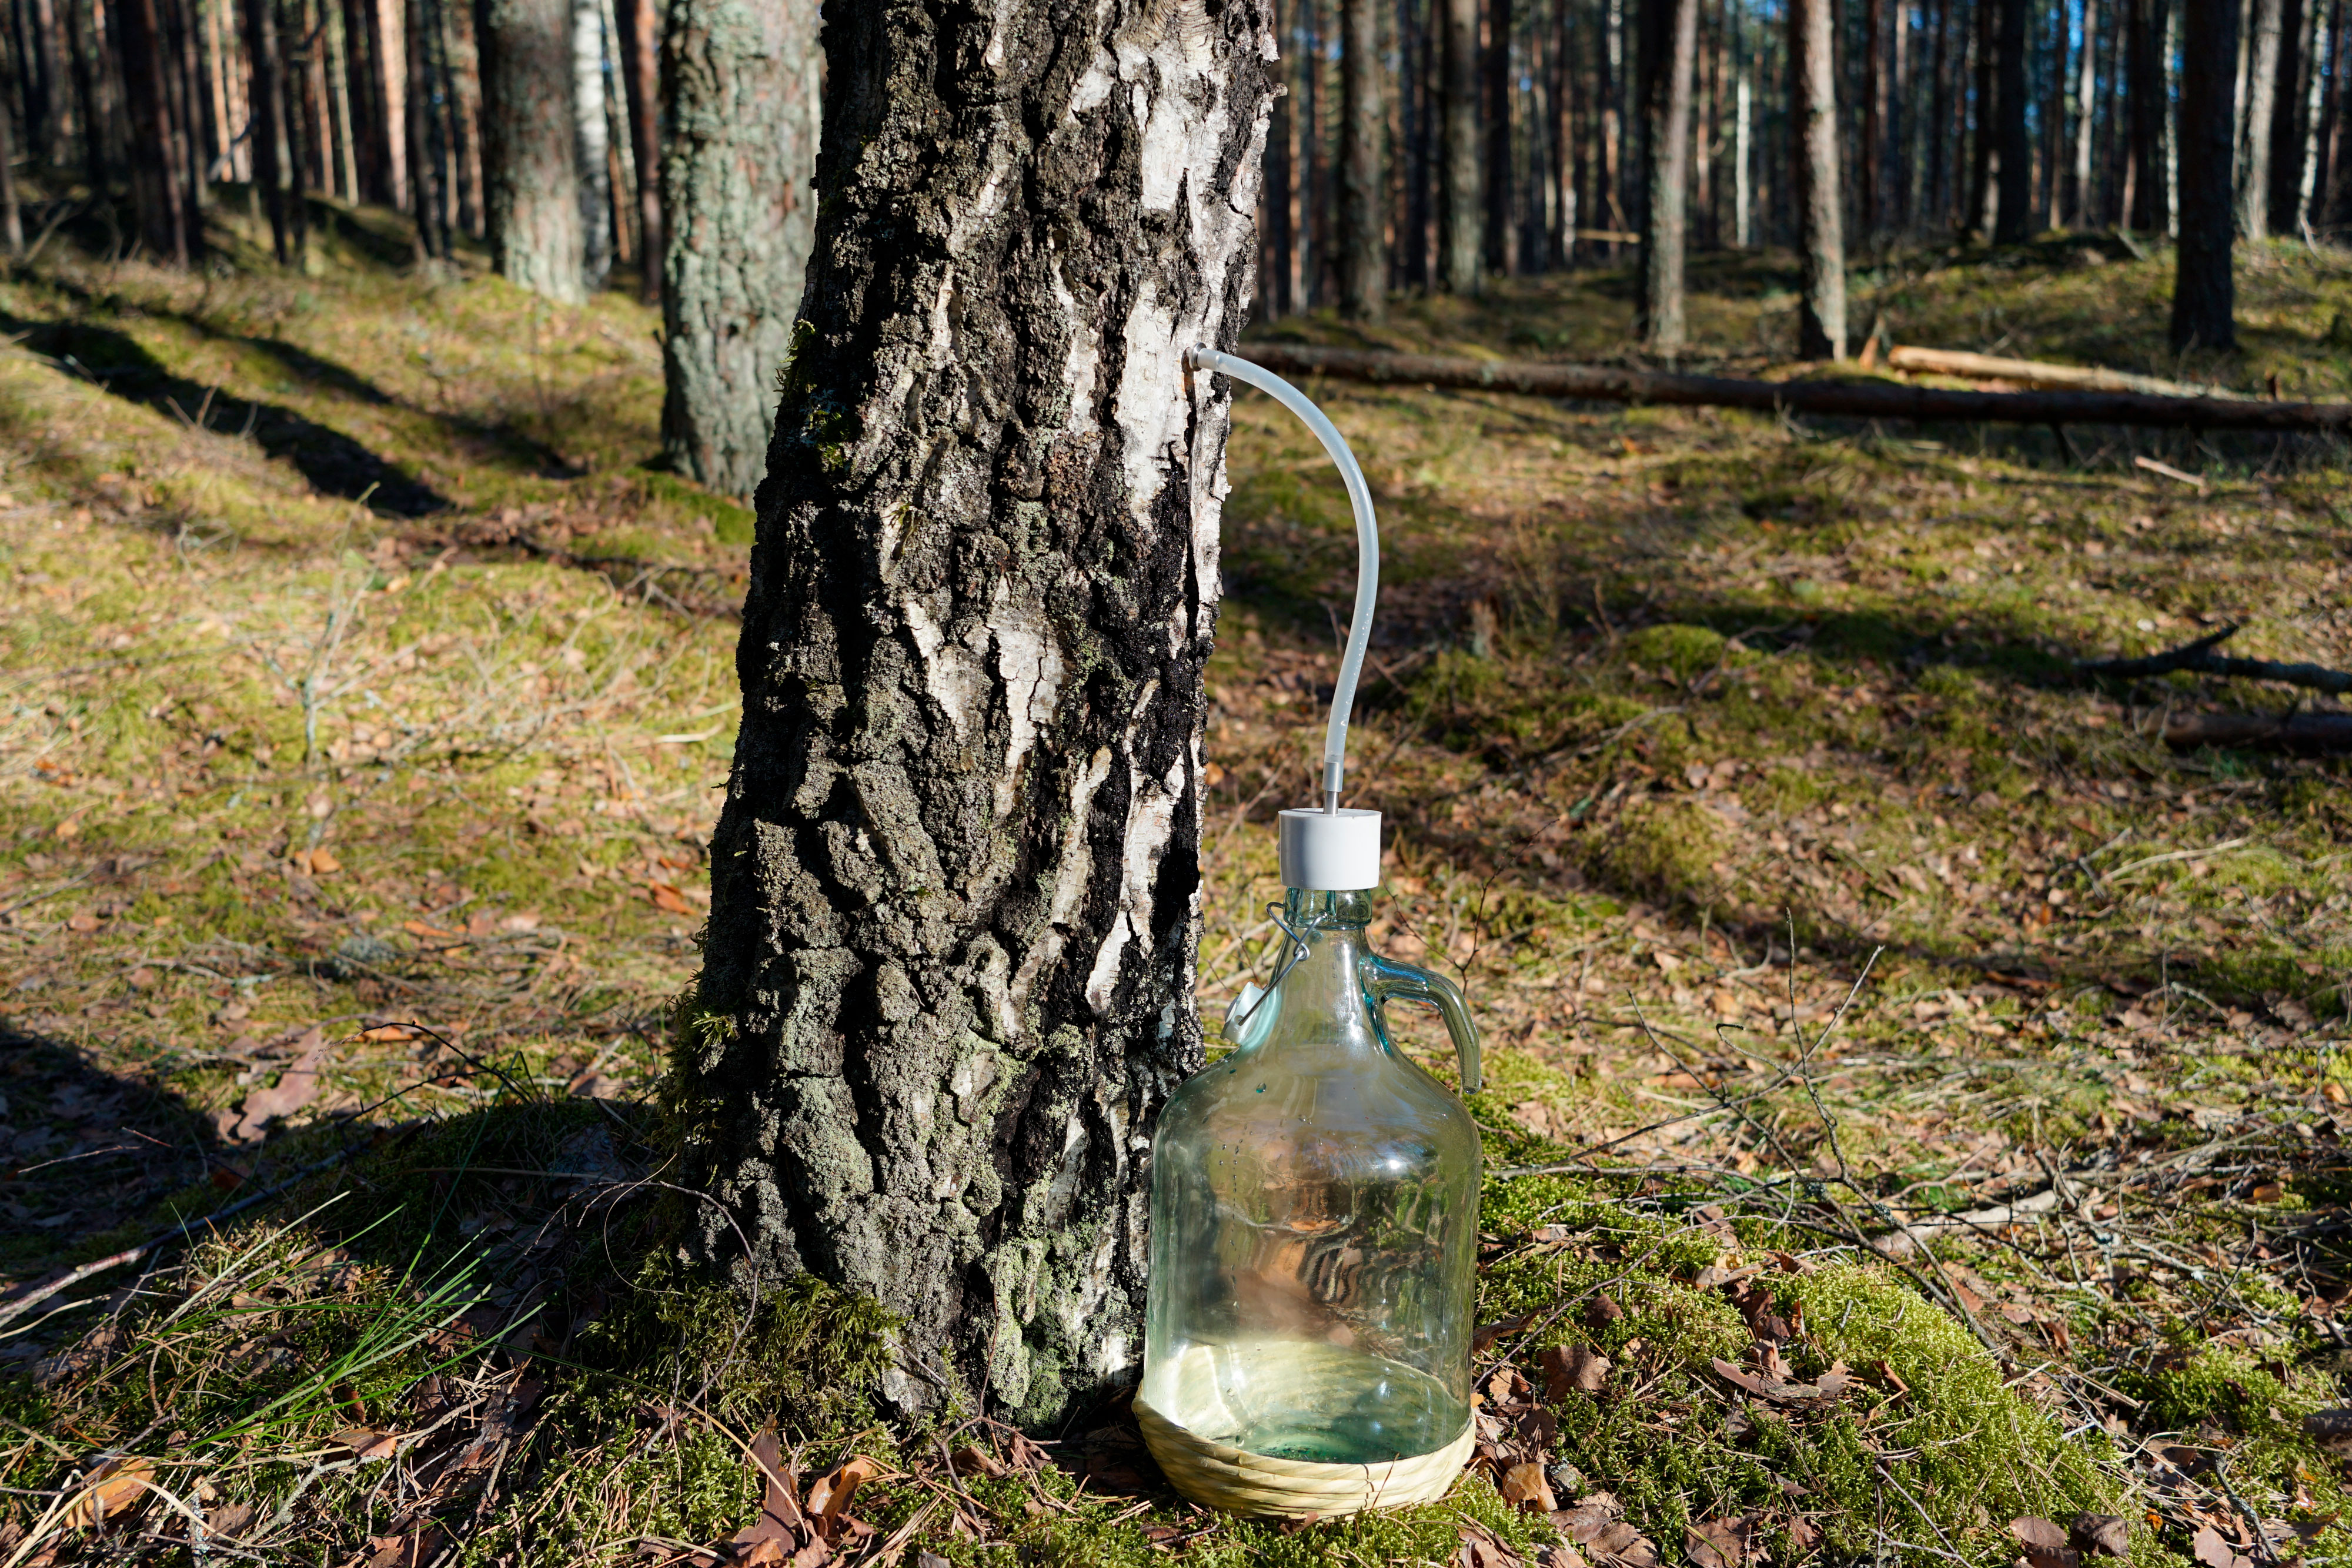 https://apple-presses.com/image/catalog/photos/Birch_sap/inox_tap_new/stainless_steel_tap_spout_for_birch_maple_sap_collecting_21.jpg